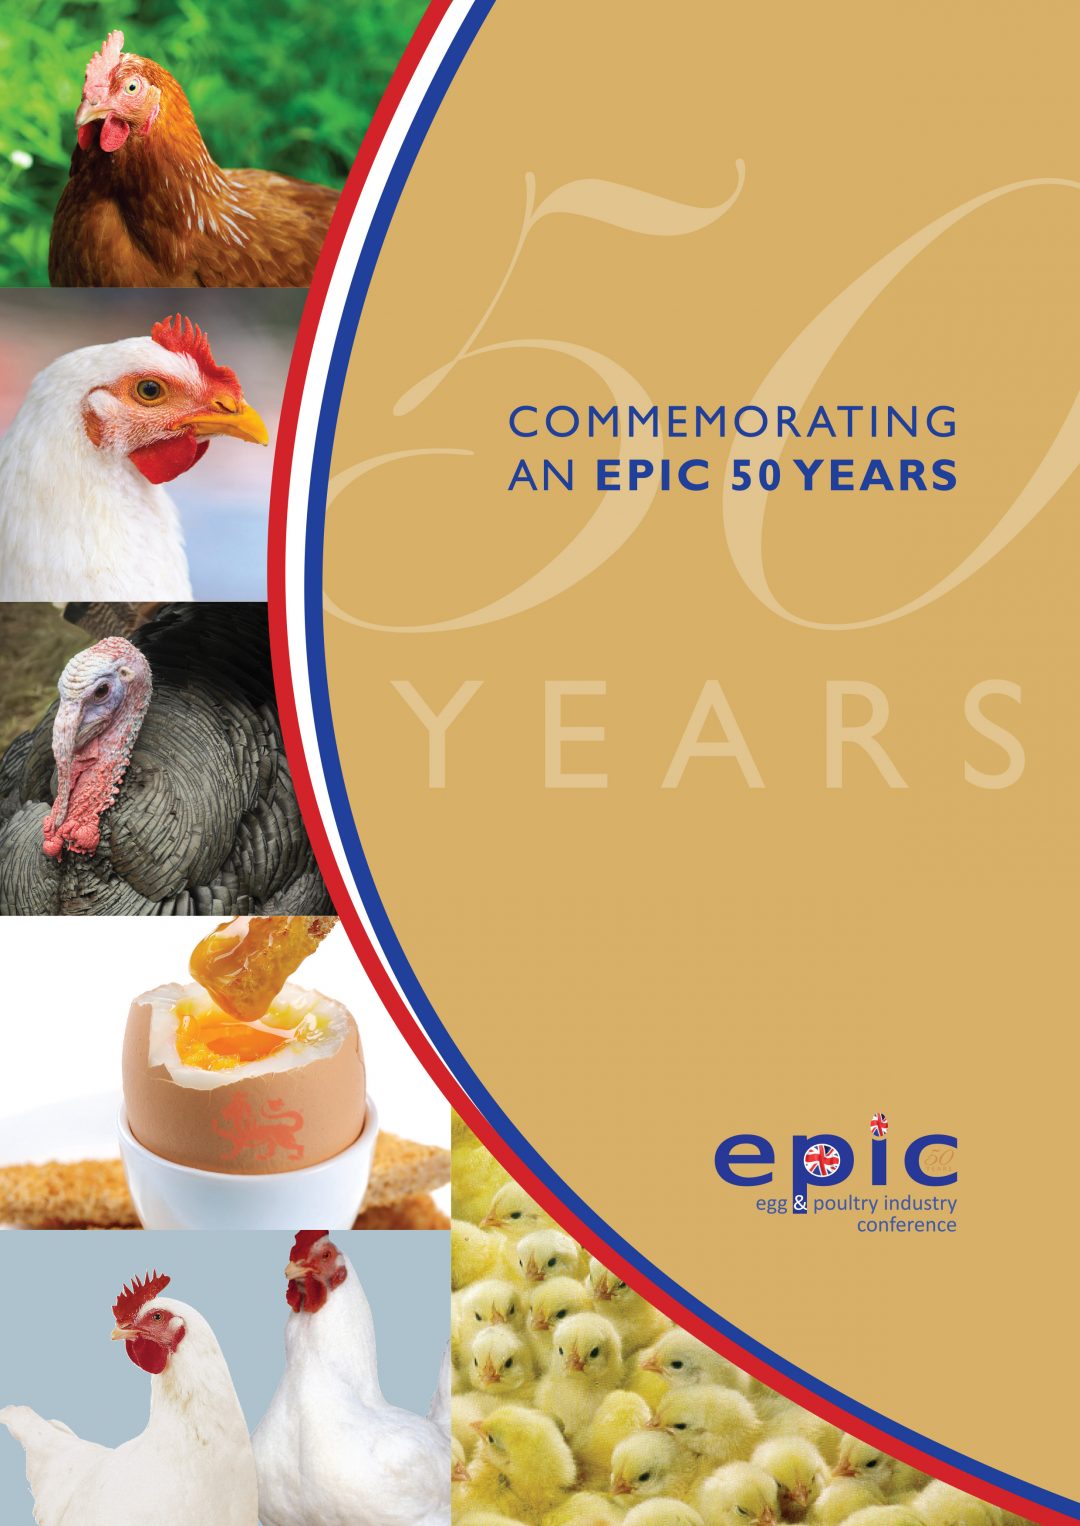 EPIC Egg and Poultry Industry Conference Egg and Poultry Industry